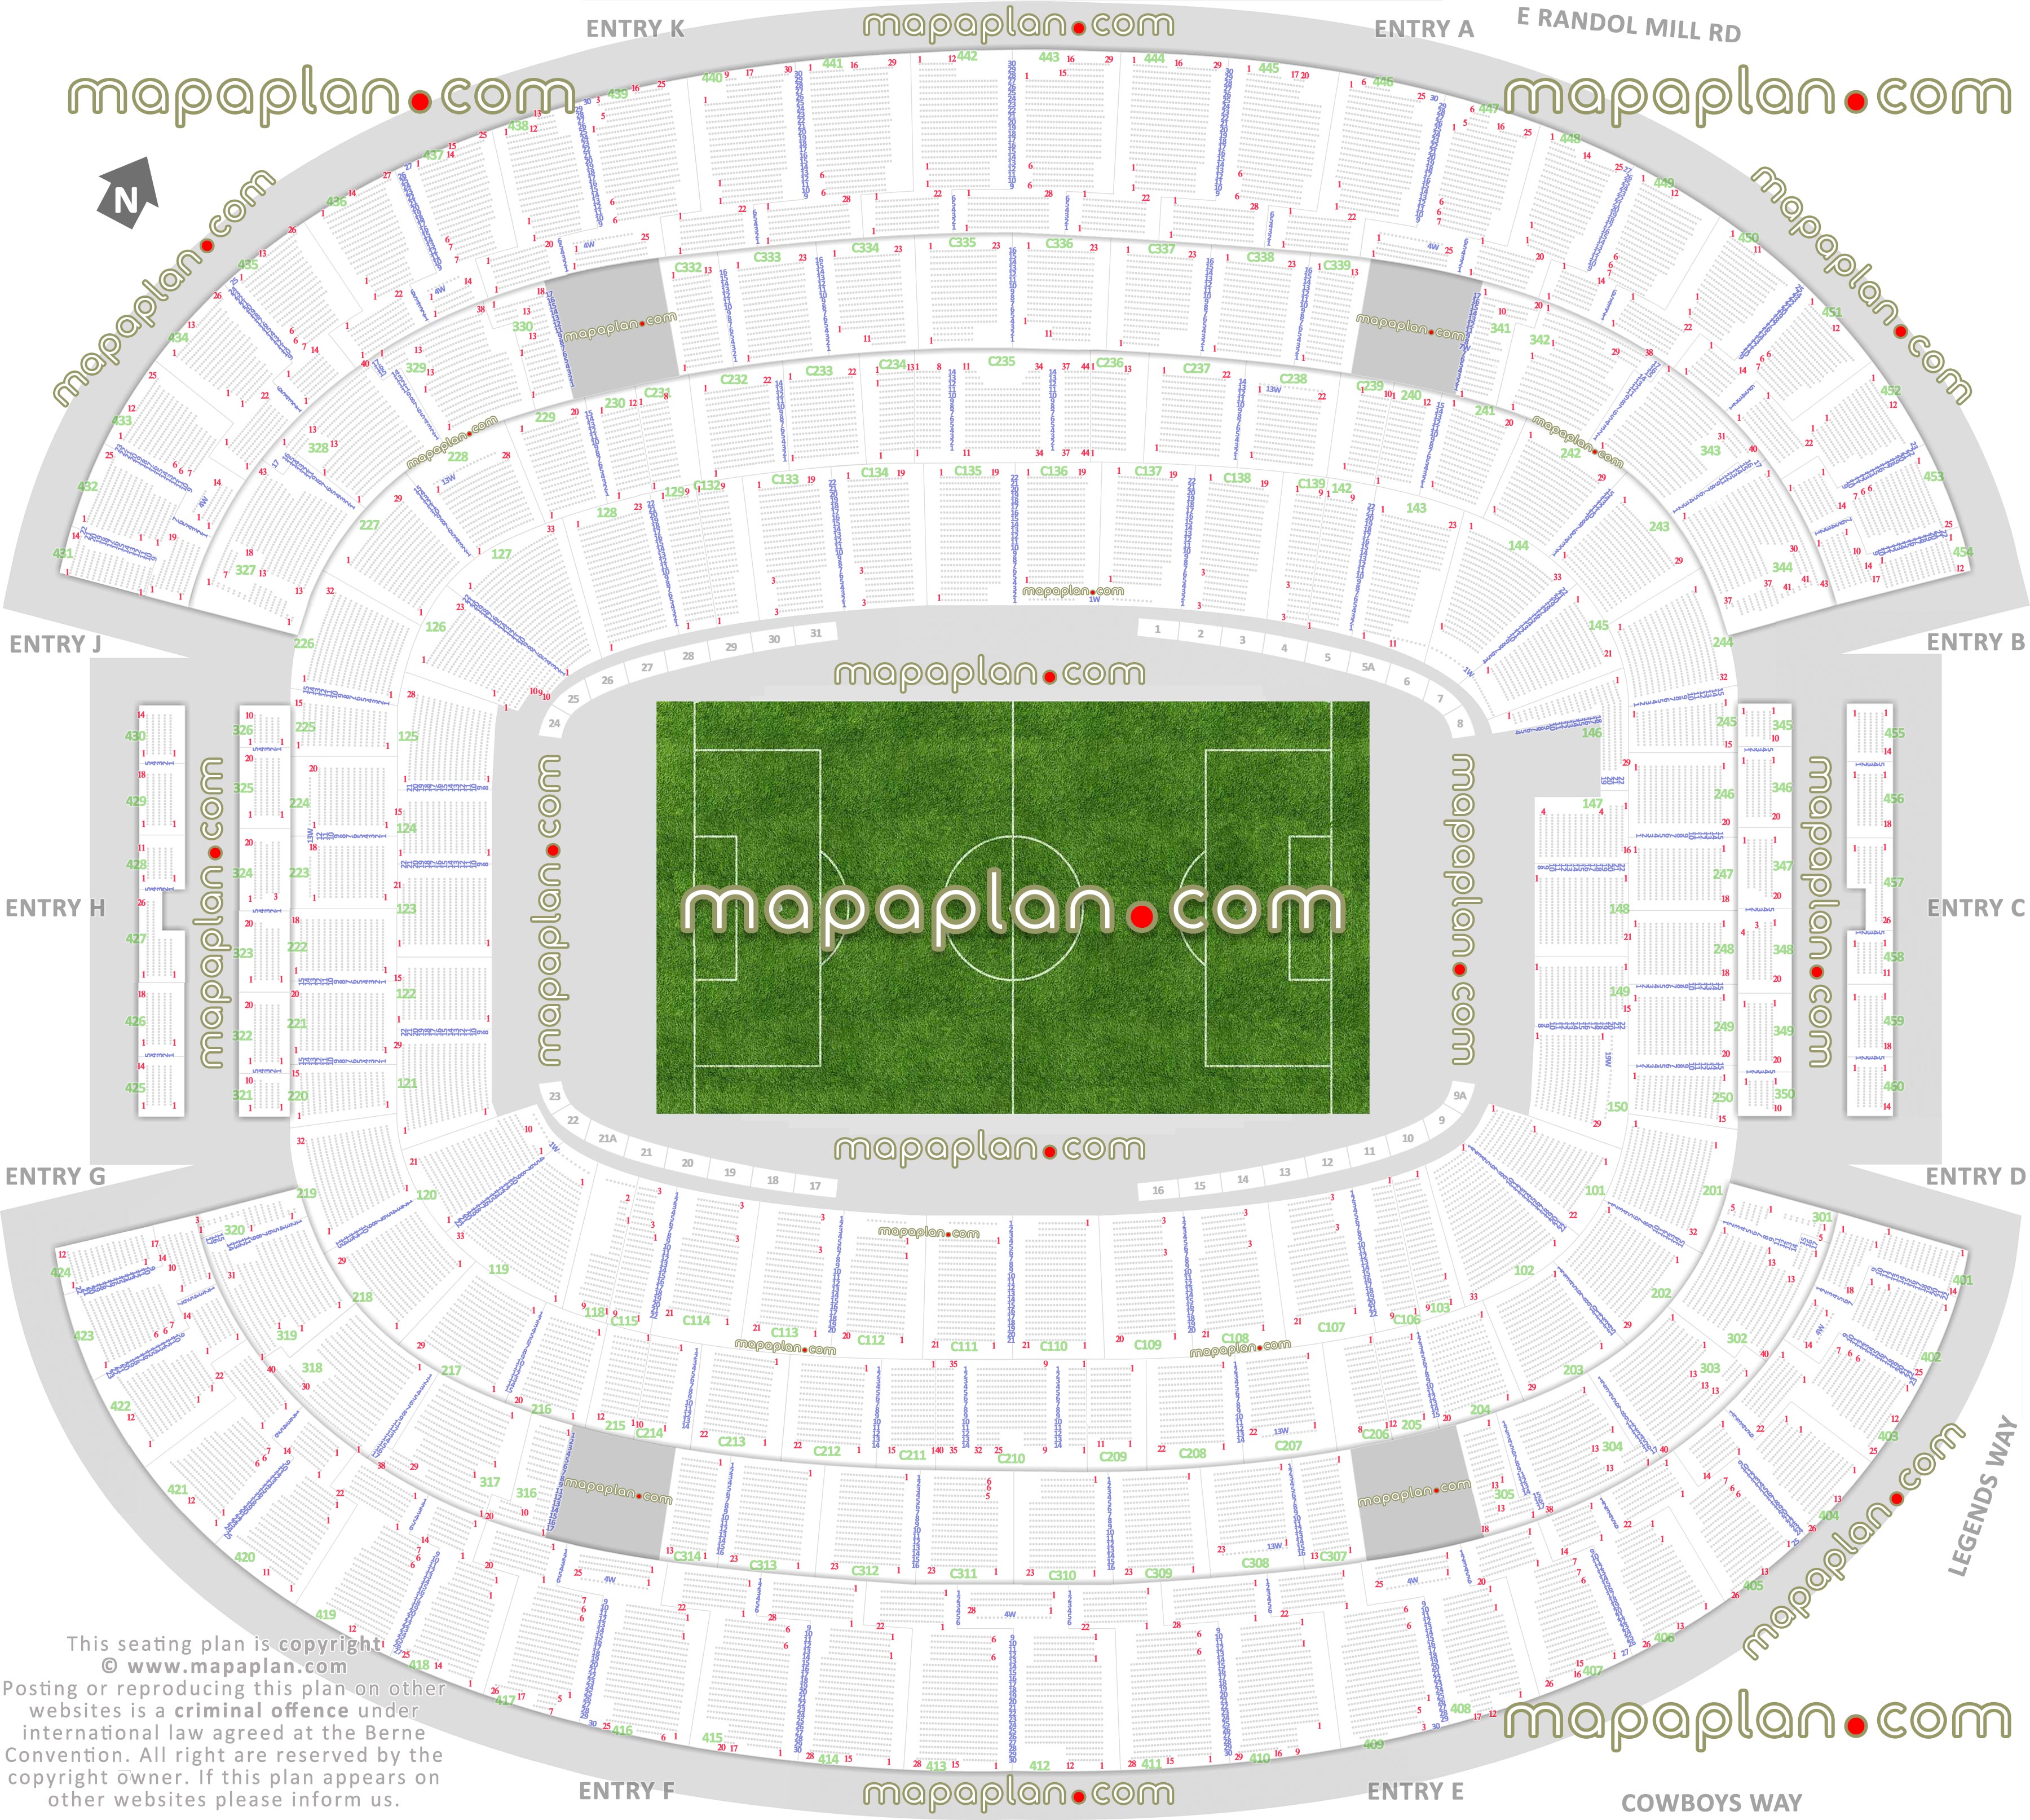 soccer games arena seating capacity arrangement diagram AT&T Stadium dallas cowboys arena tx usa best seat finder interactive virtual 3d detailed layout tool precise detailed aisle seat loge box rows numbering location data plan full exact row numbers plan seats row lower hall fame main mezzanine upper concourse level baseline sideline corner seats Dallas Cowboys AT&T Stadium seating chart